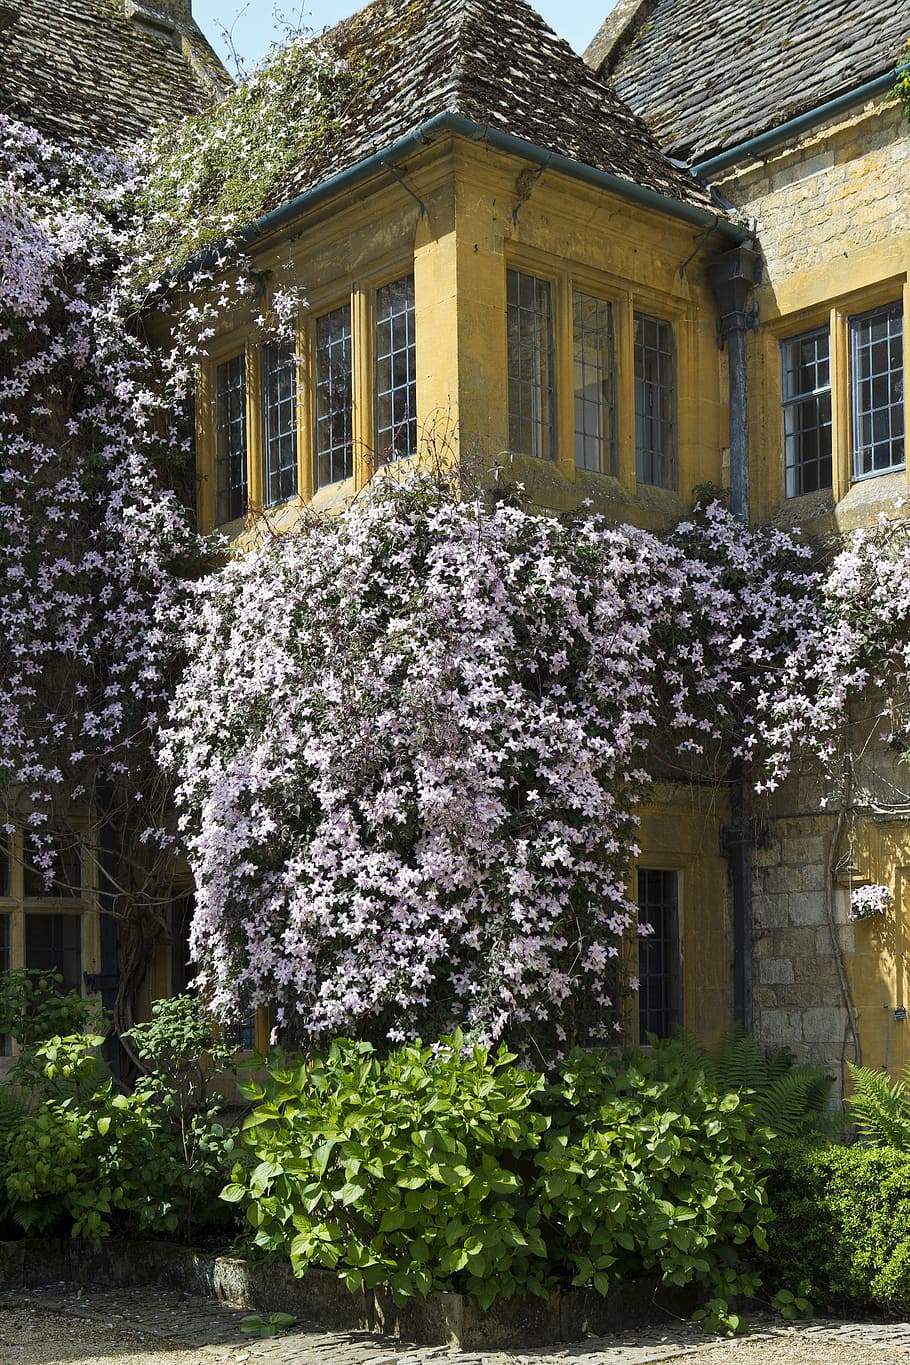 hidcote manor, architecture, arts and crafts, limestone, ashlar, walling, slate roof, clematis, house, window